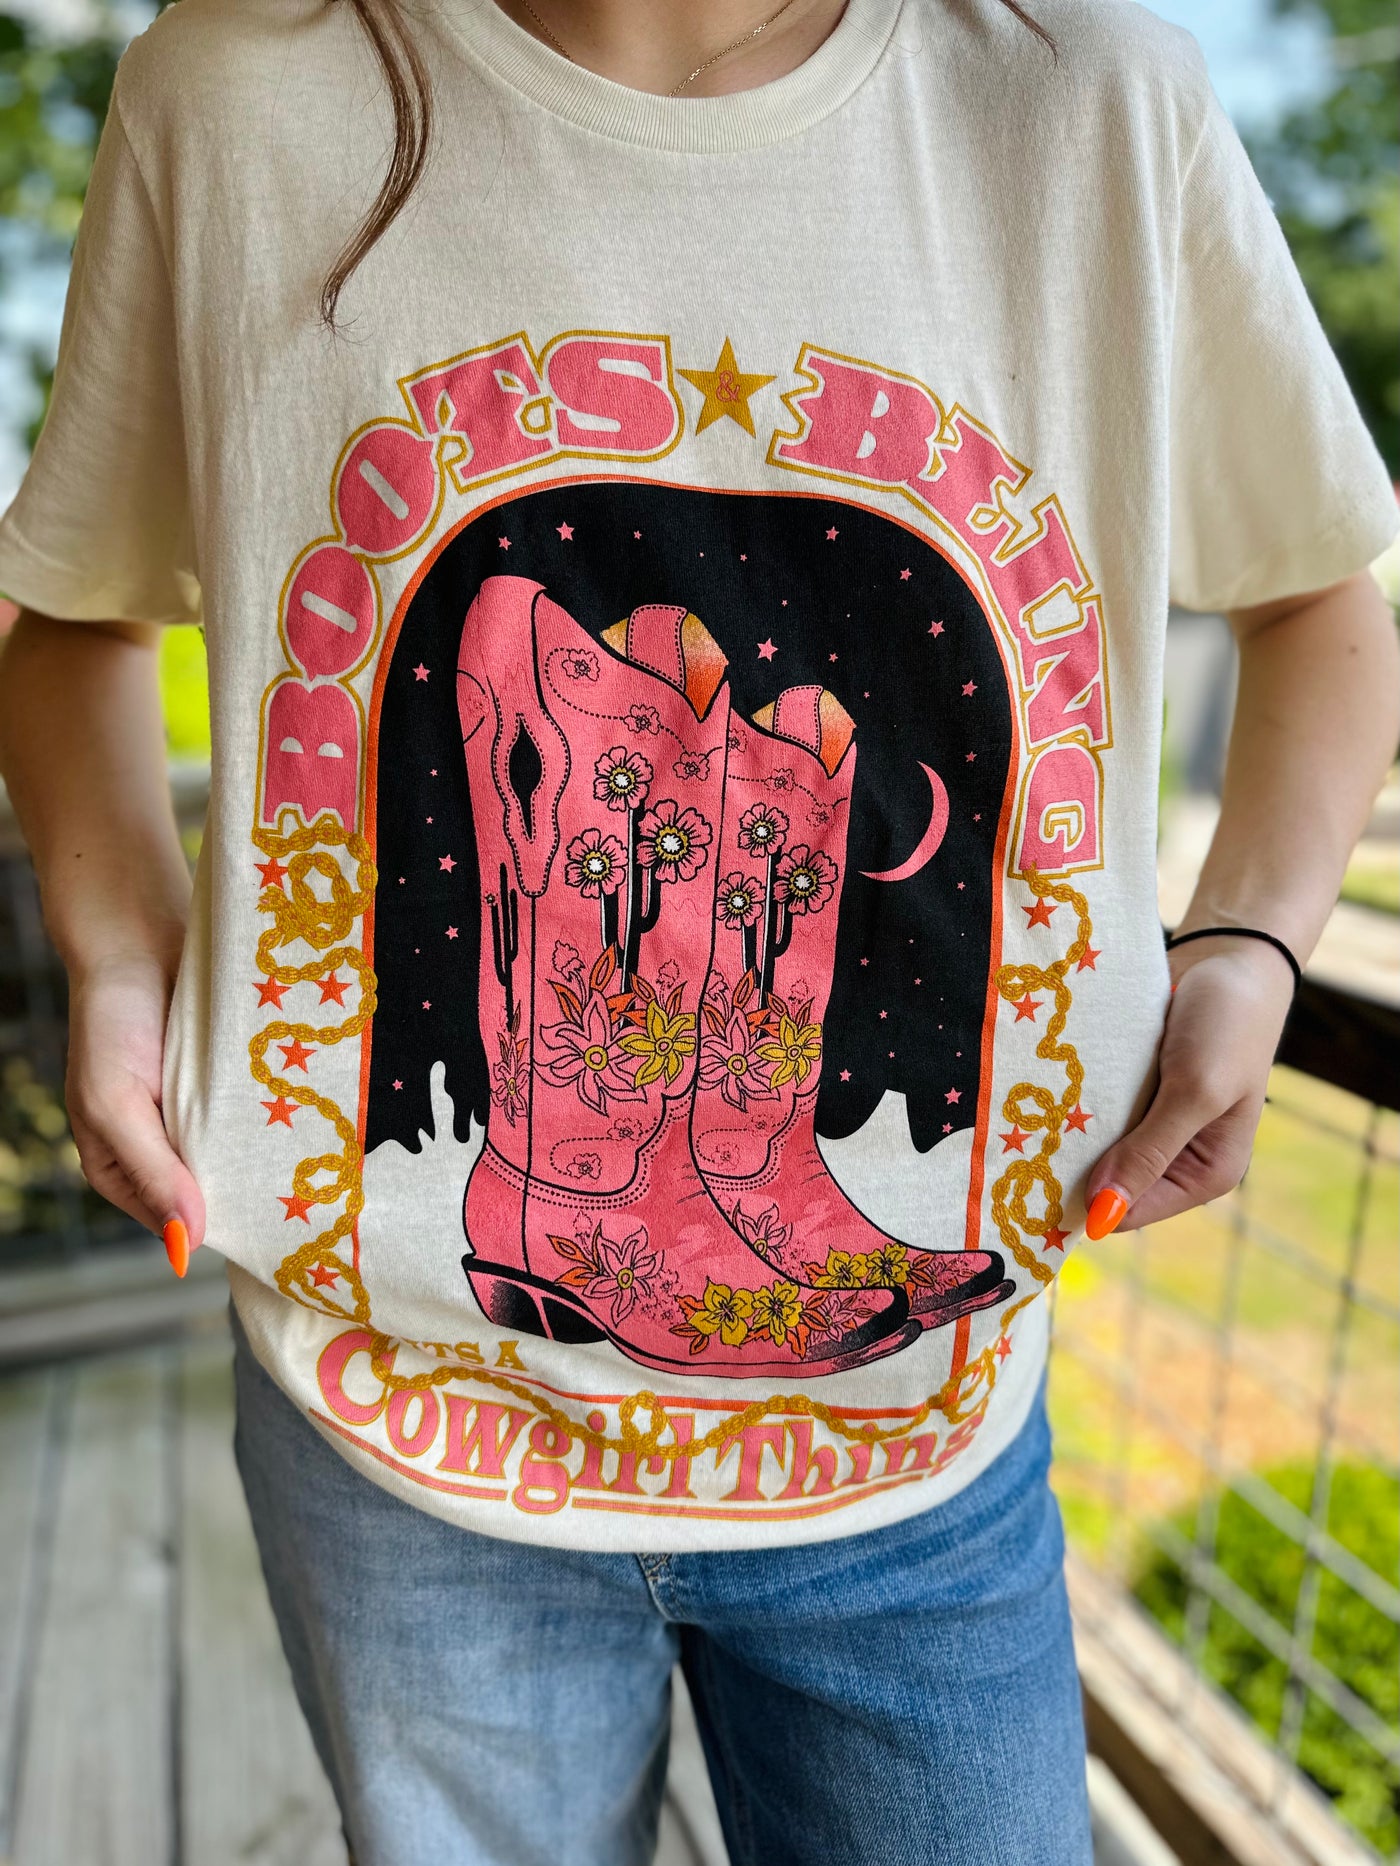 "Boots, Bling, It's A Cowgirl Thing" Tee